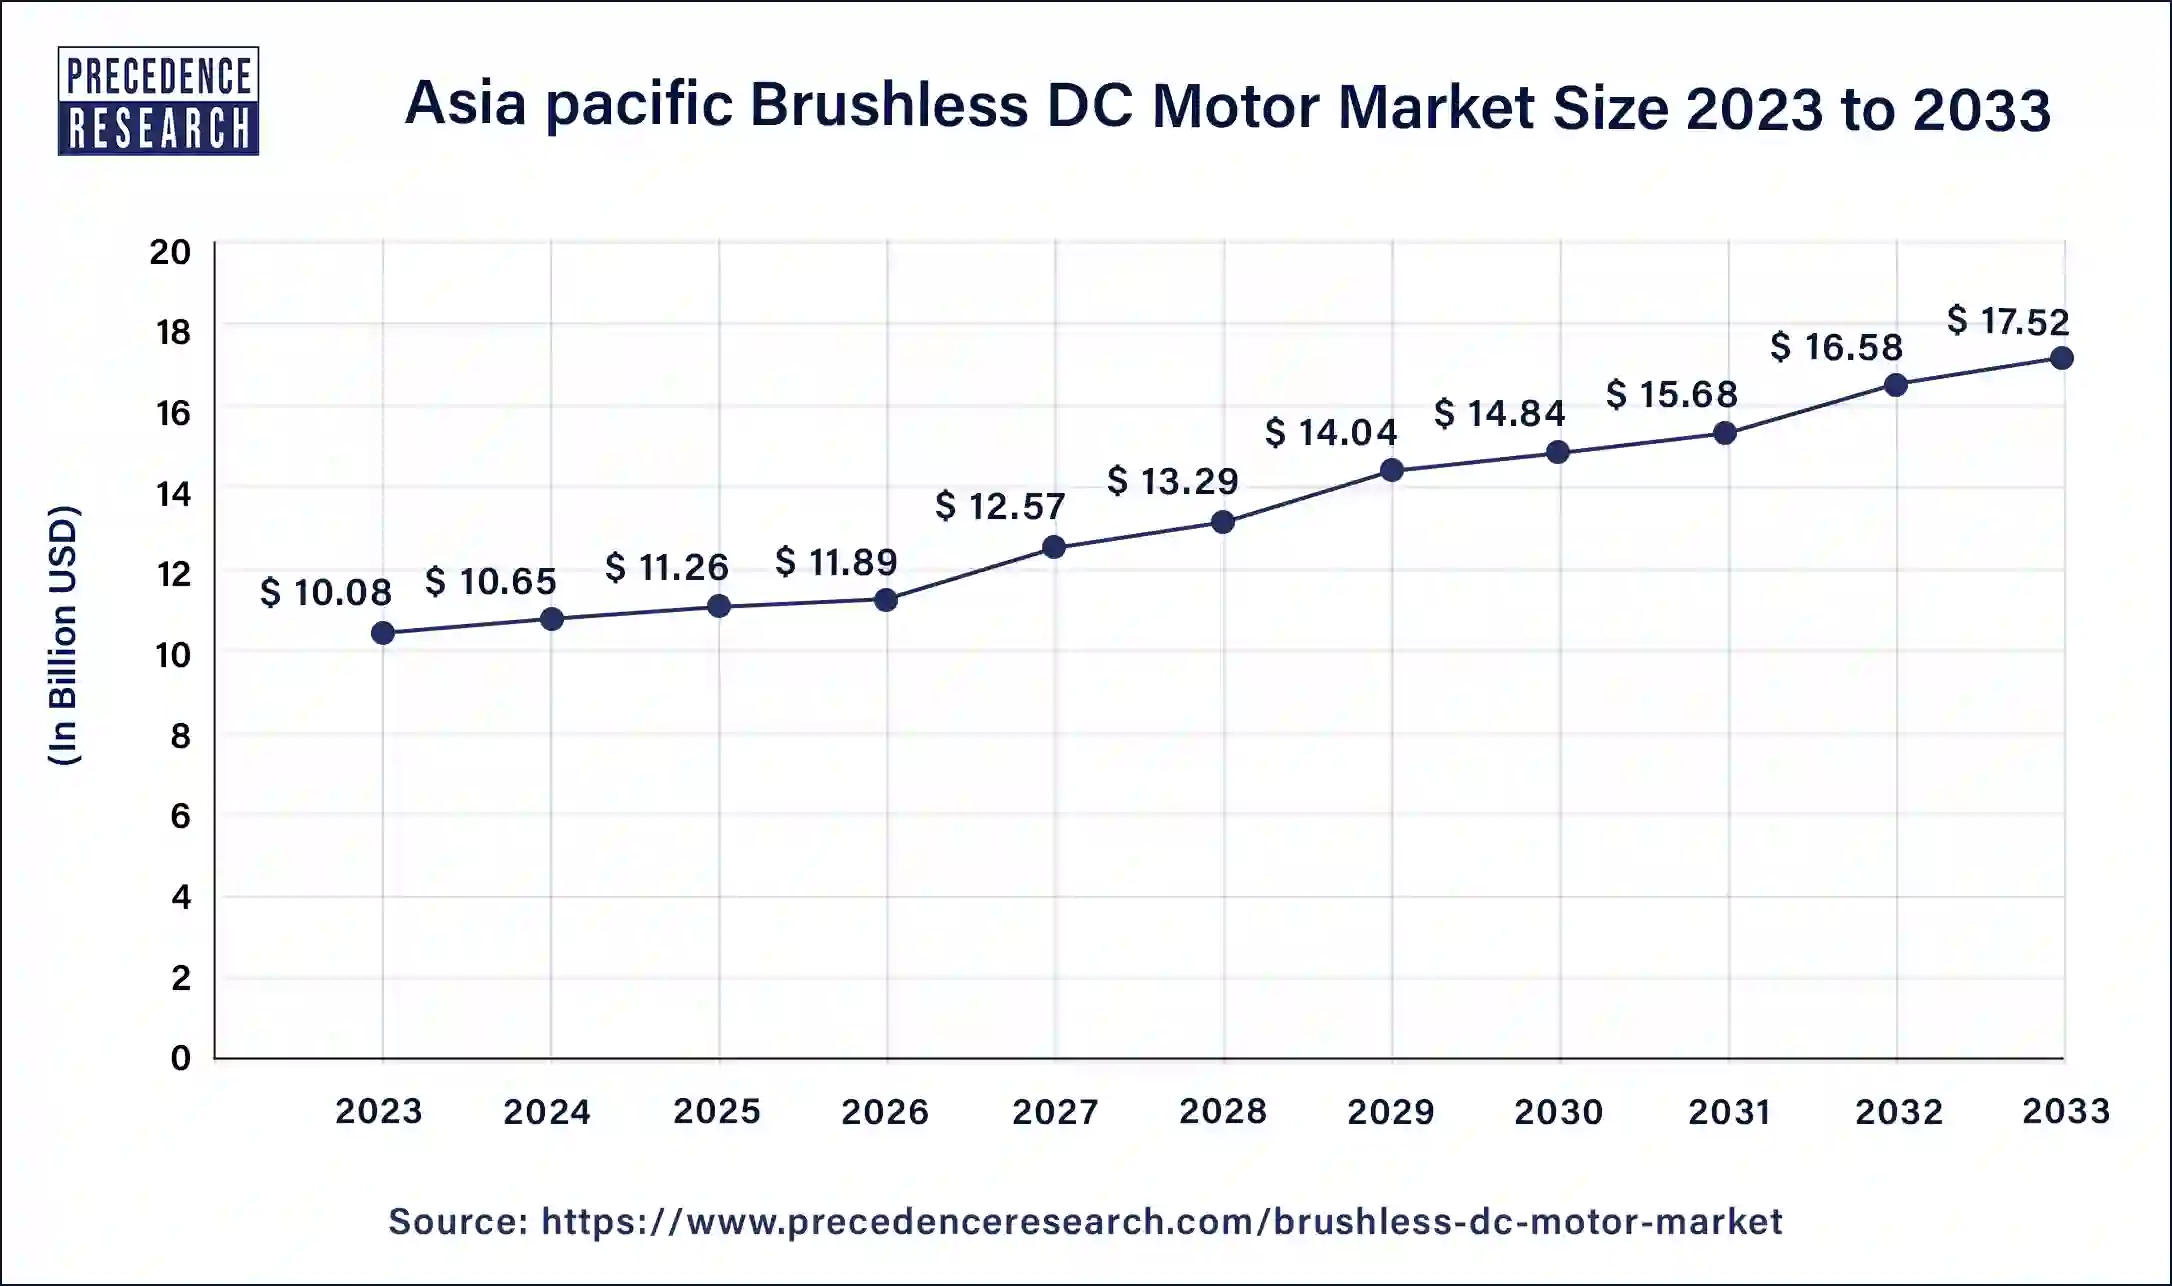 Asia Pacific Brushless DC Motor Market Size 2024 to 2033